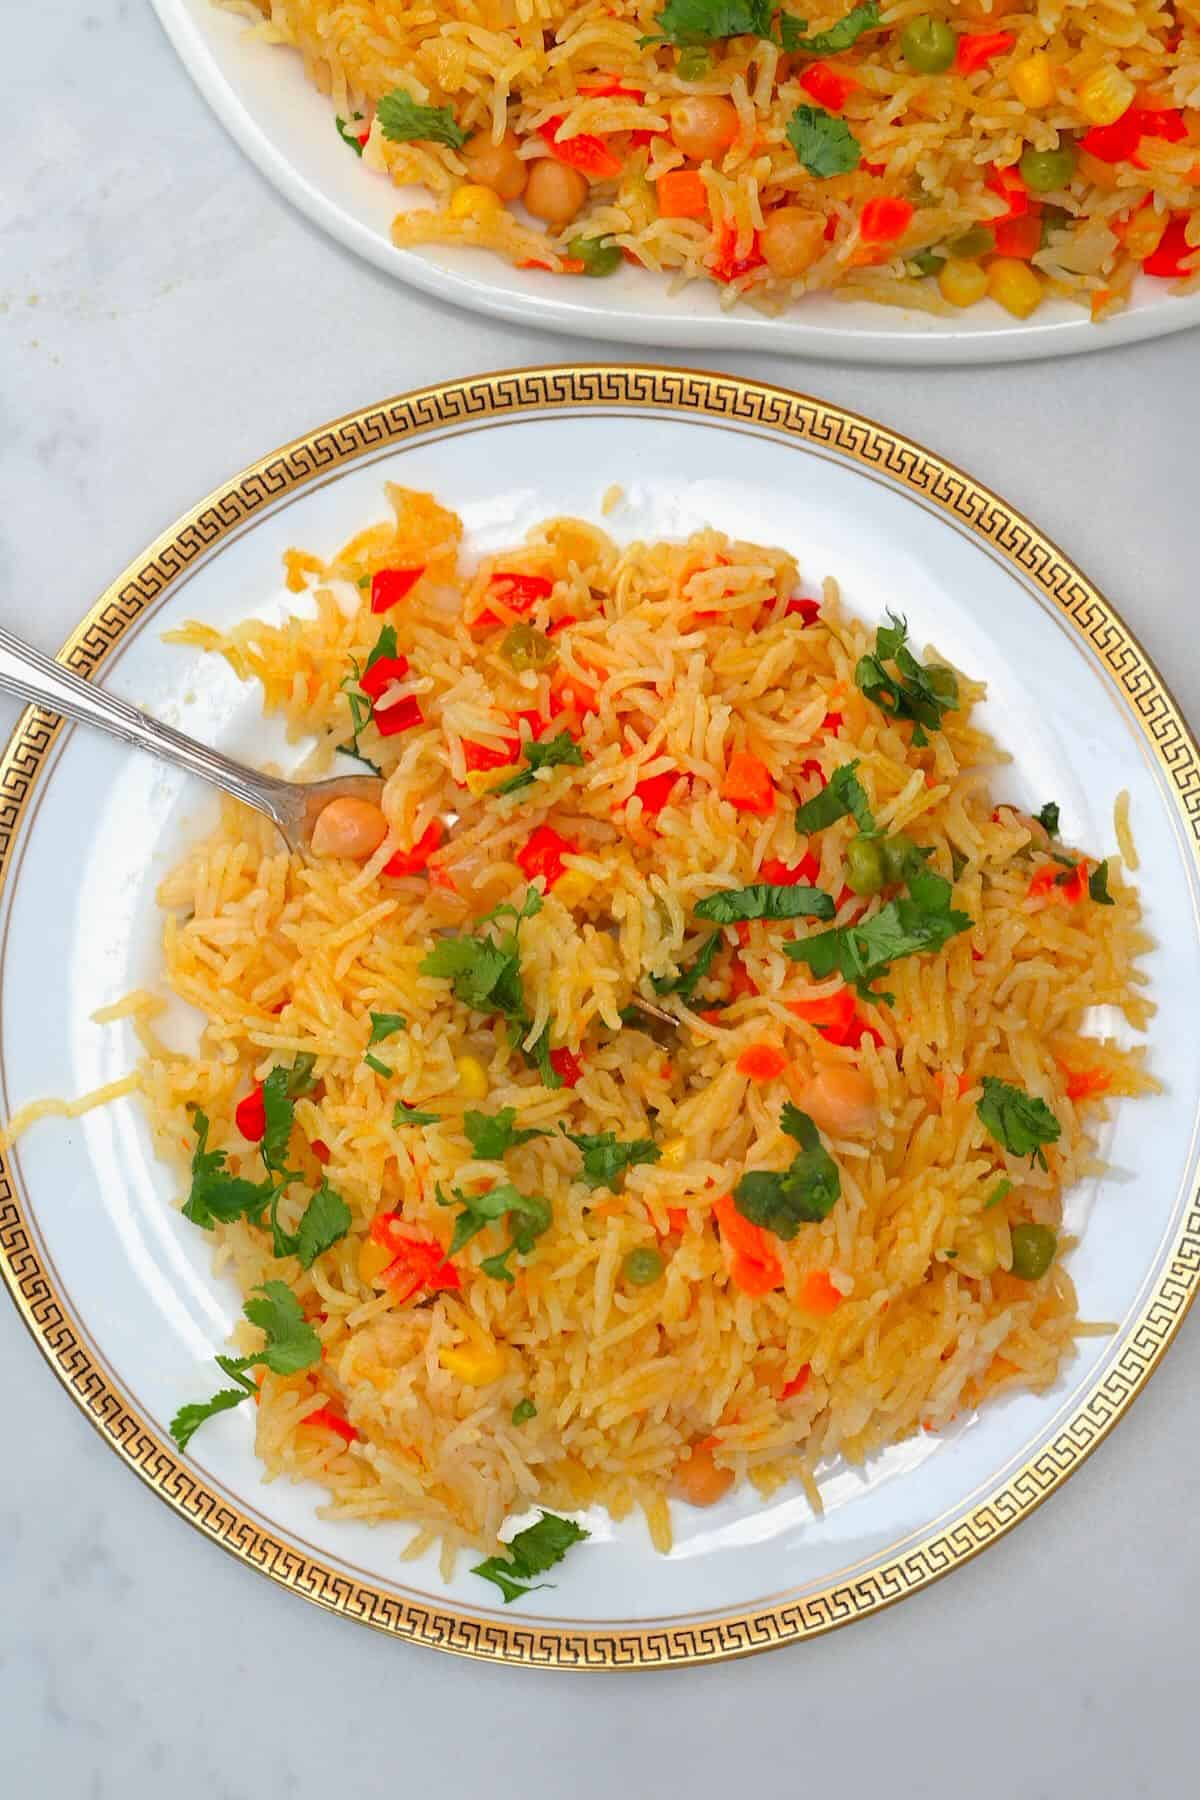 A serving of vegetable rice in a plate with a fork